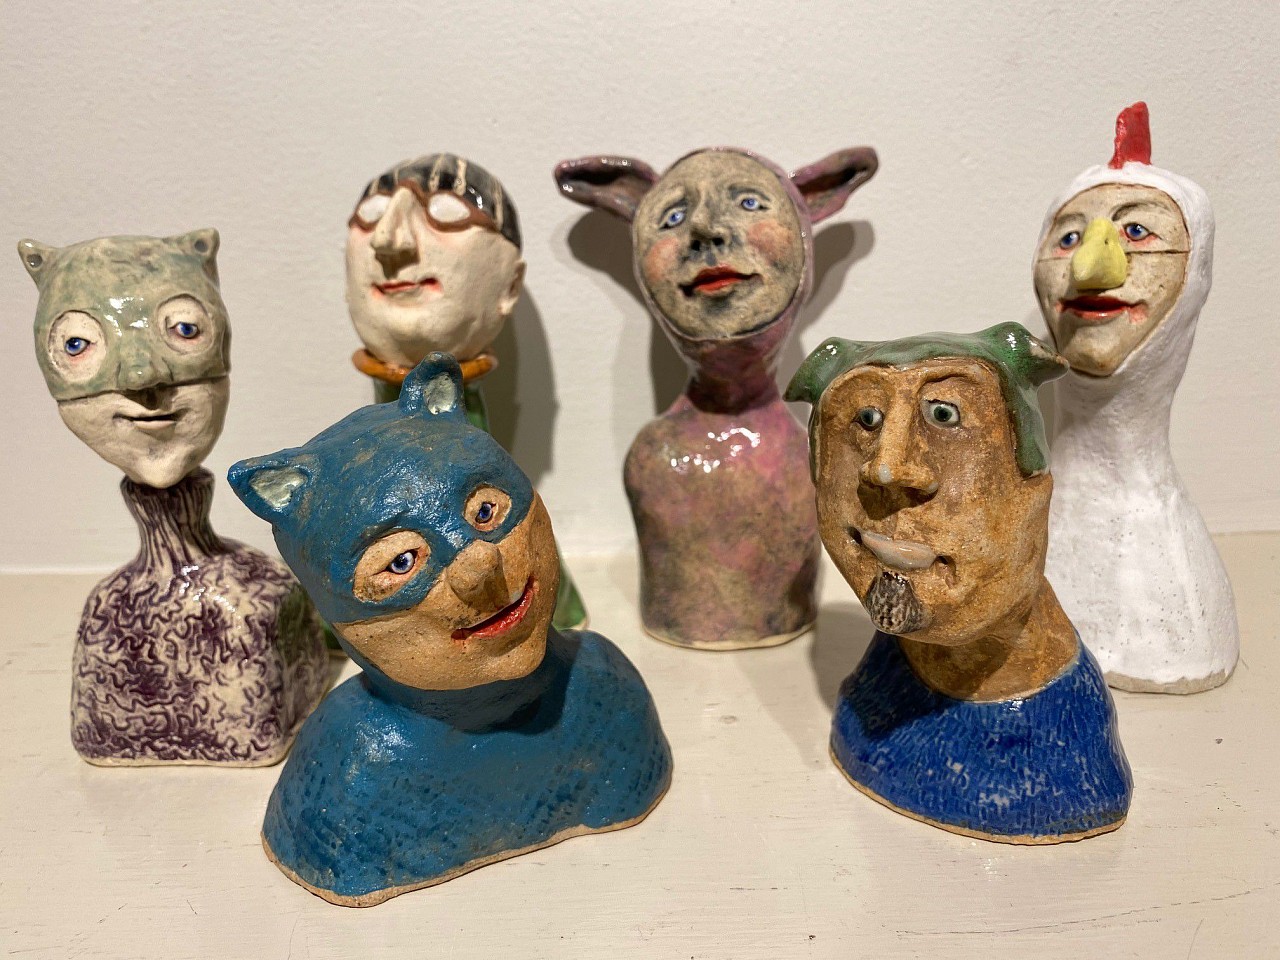 Jeanine Pennell, Characters Group 1
glazed ceramic, 4"" - 6""
JCAC 6292.01
$175